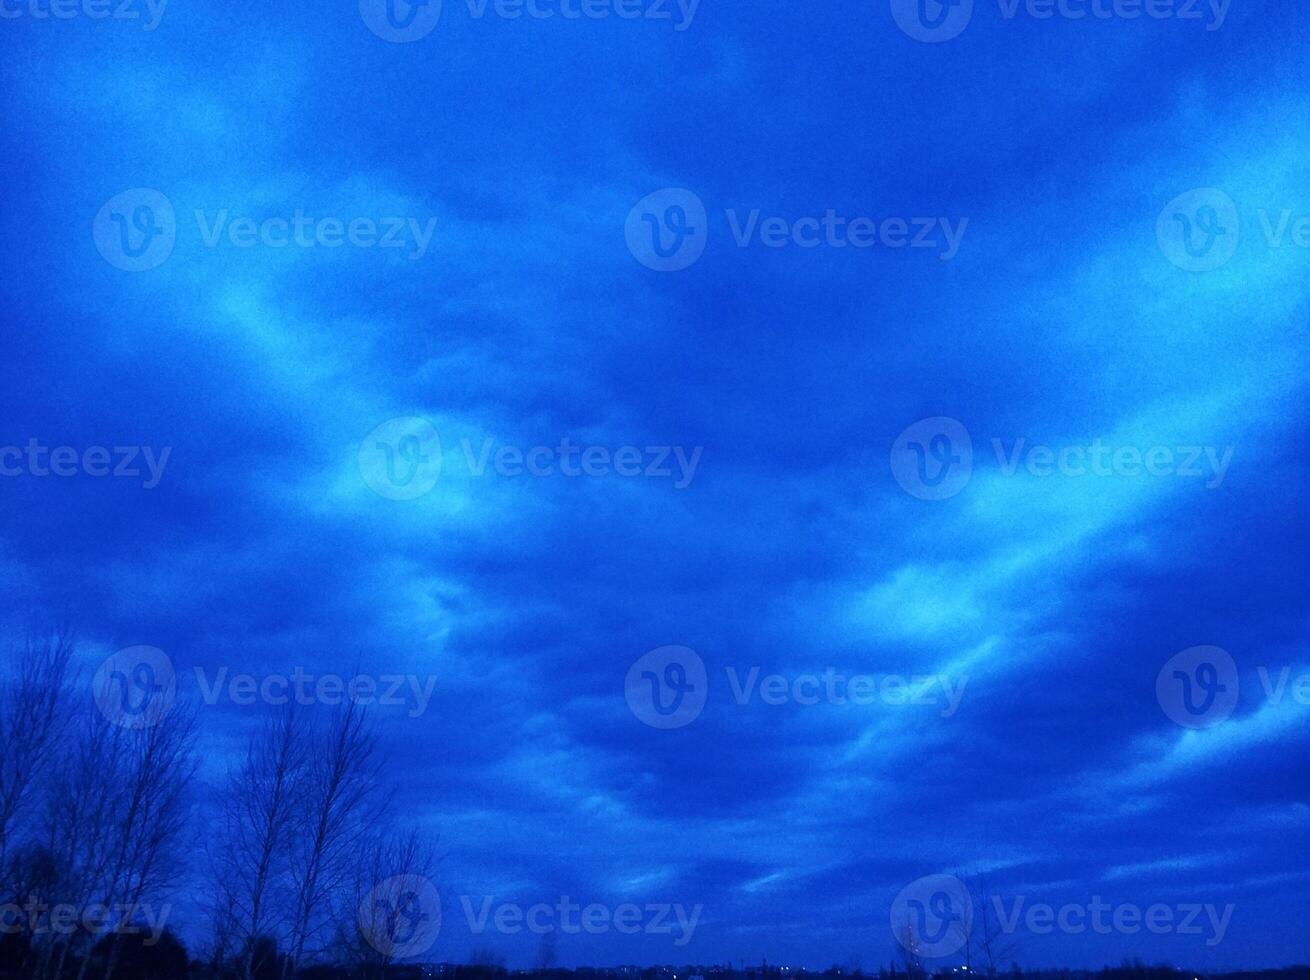 Incredibly bright evening blue sky with long clouds stretching across the sky photo